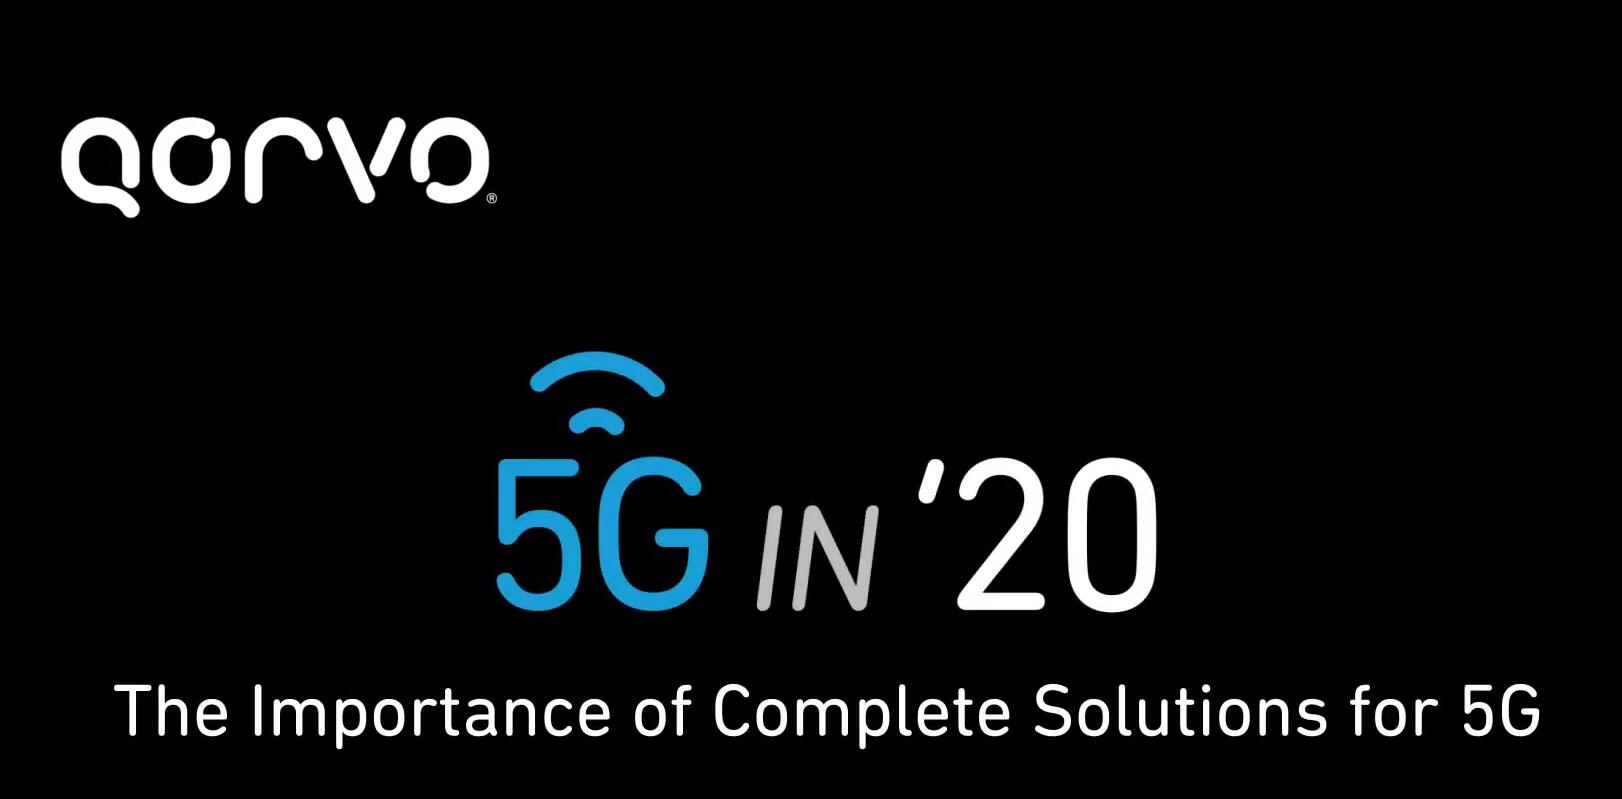 The Importance of Complete Solutions for 5G